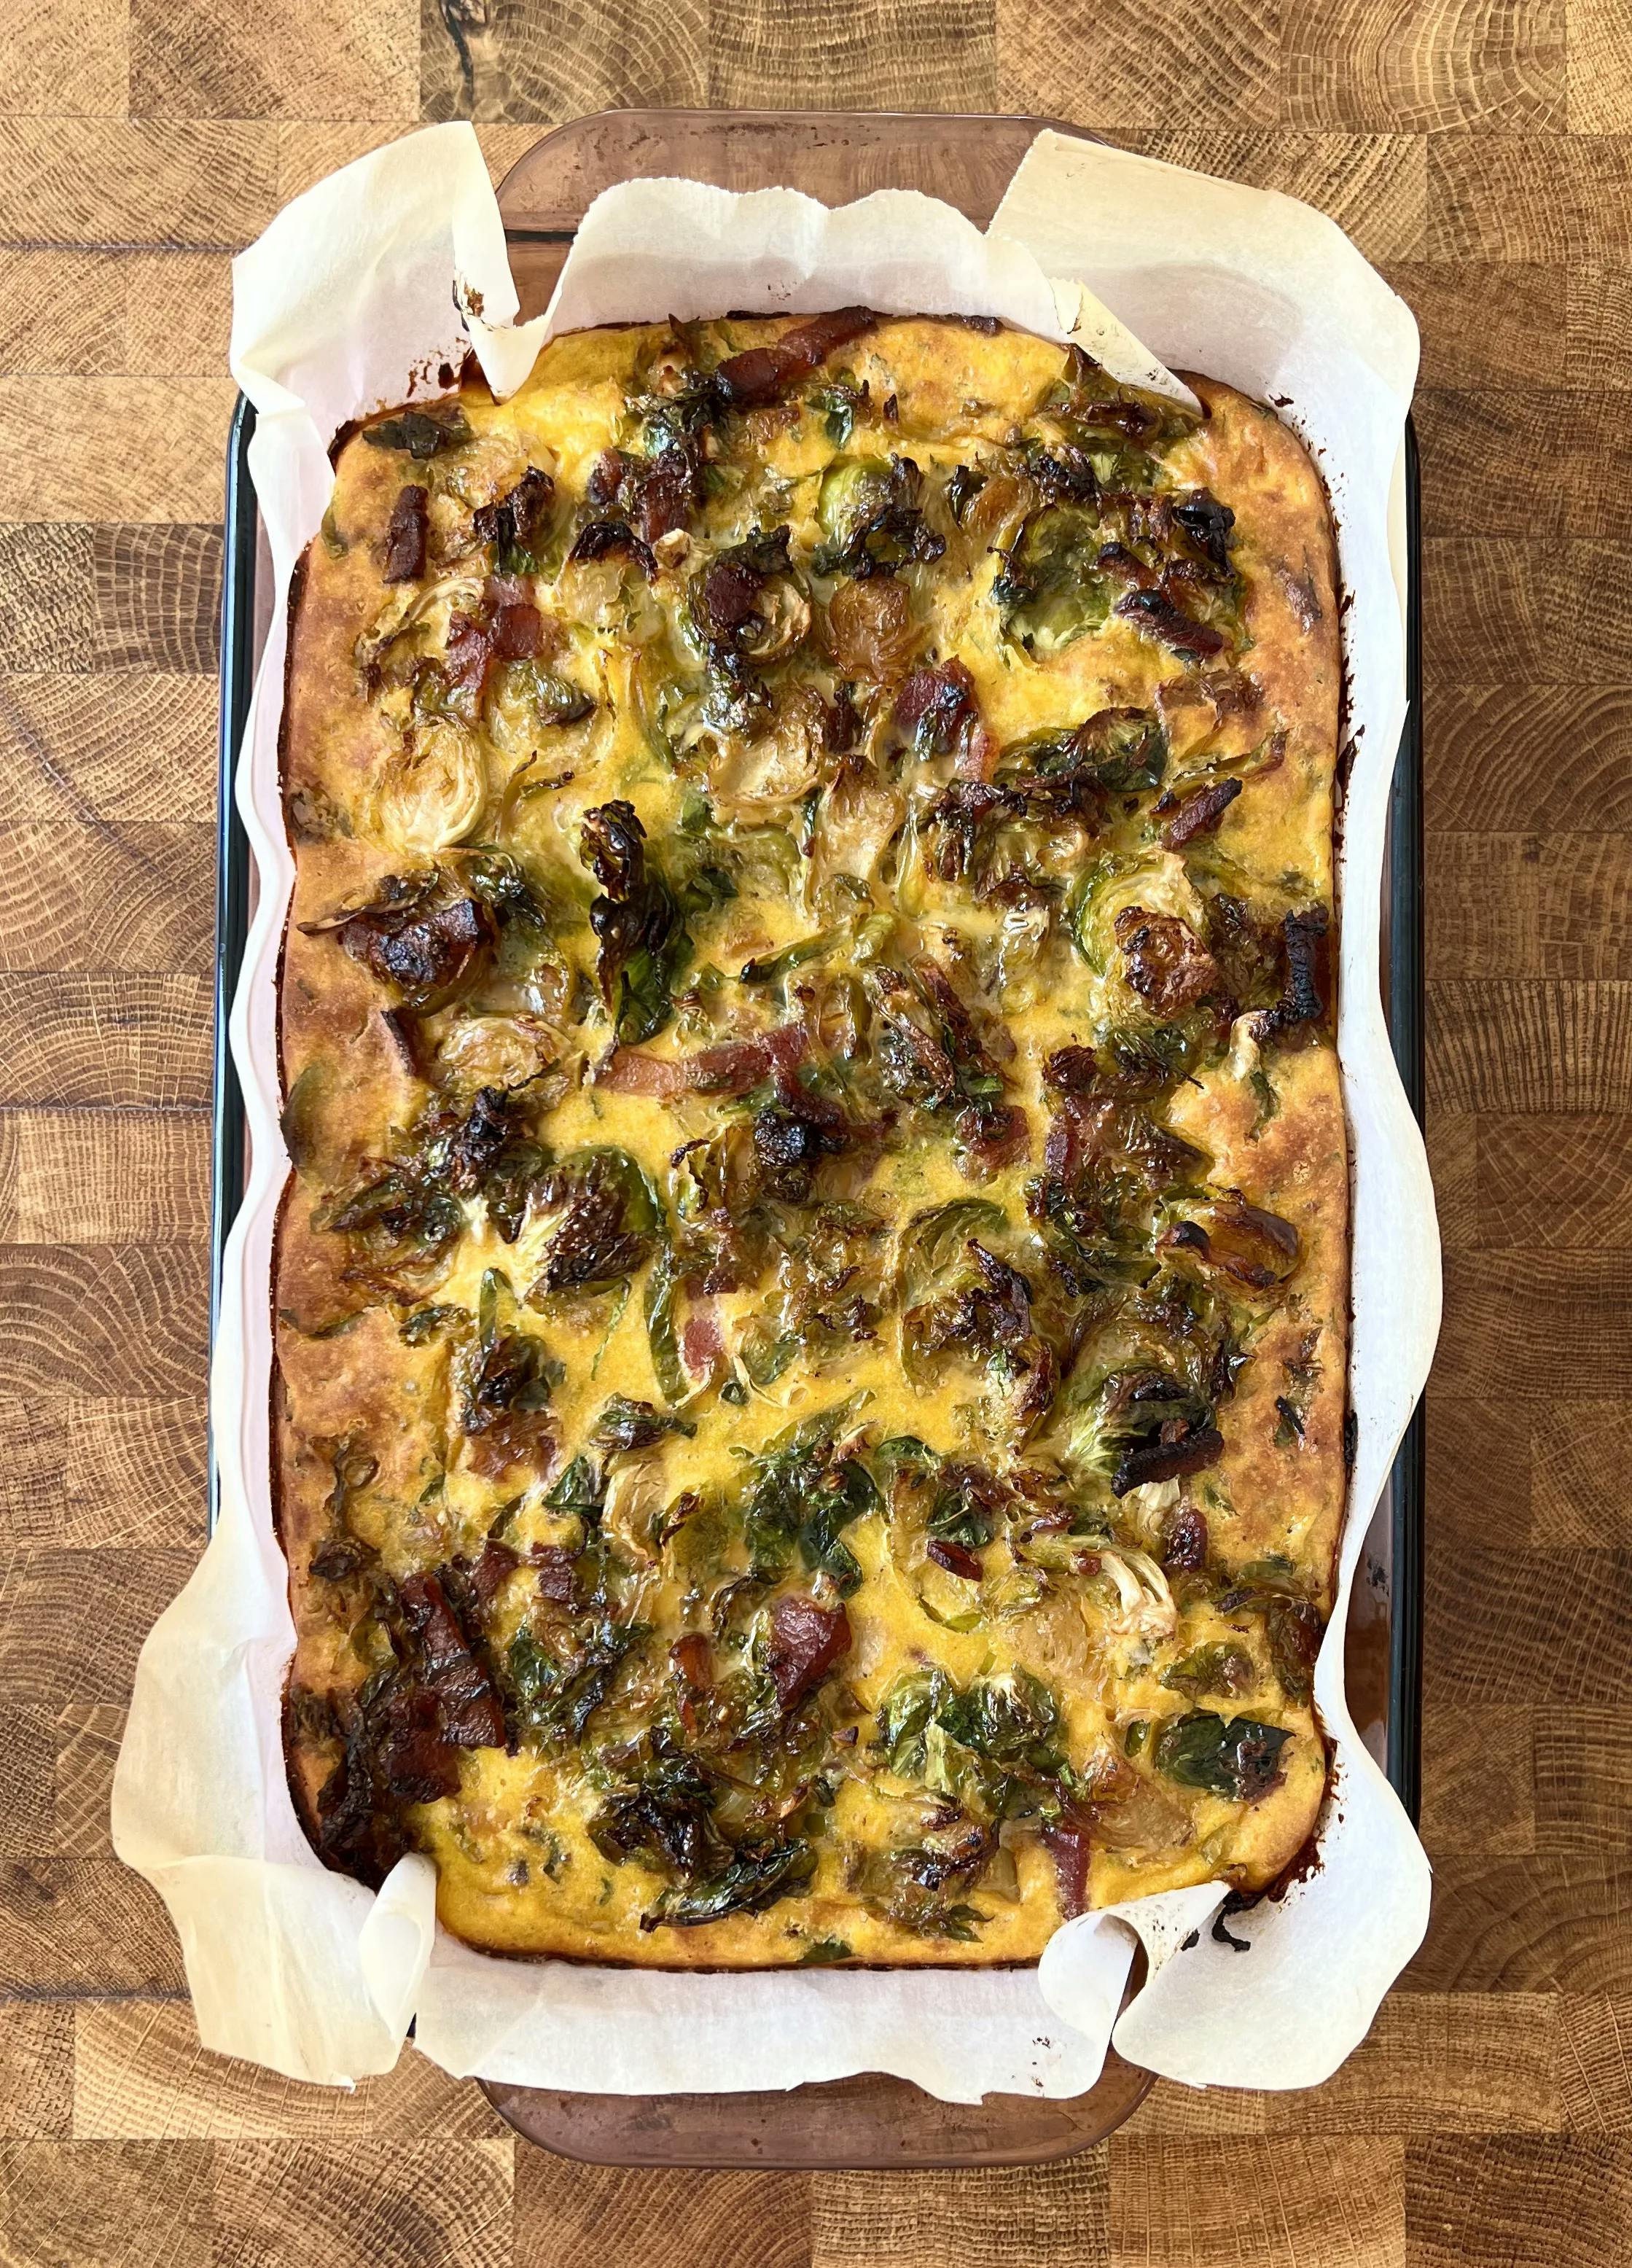 Picture for Sweet Potato & Maple Bacon Brussel Sprout Frittata